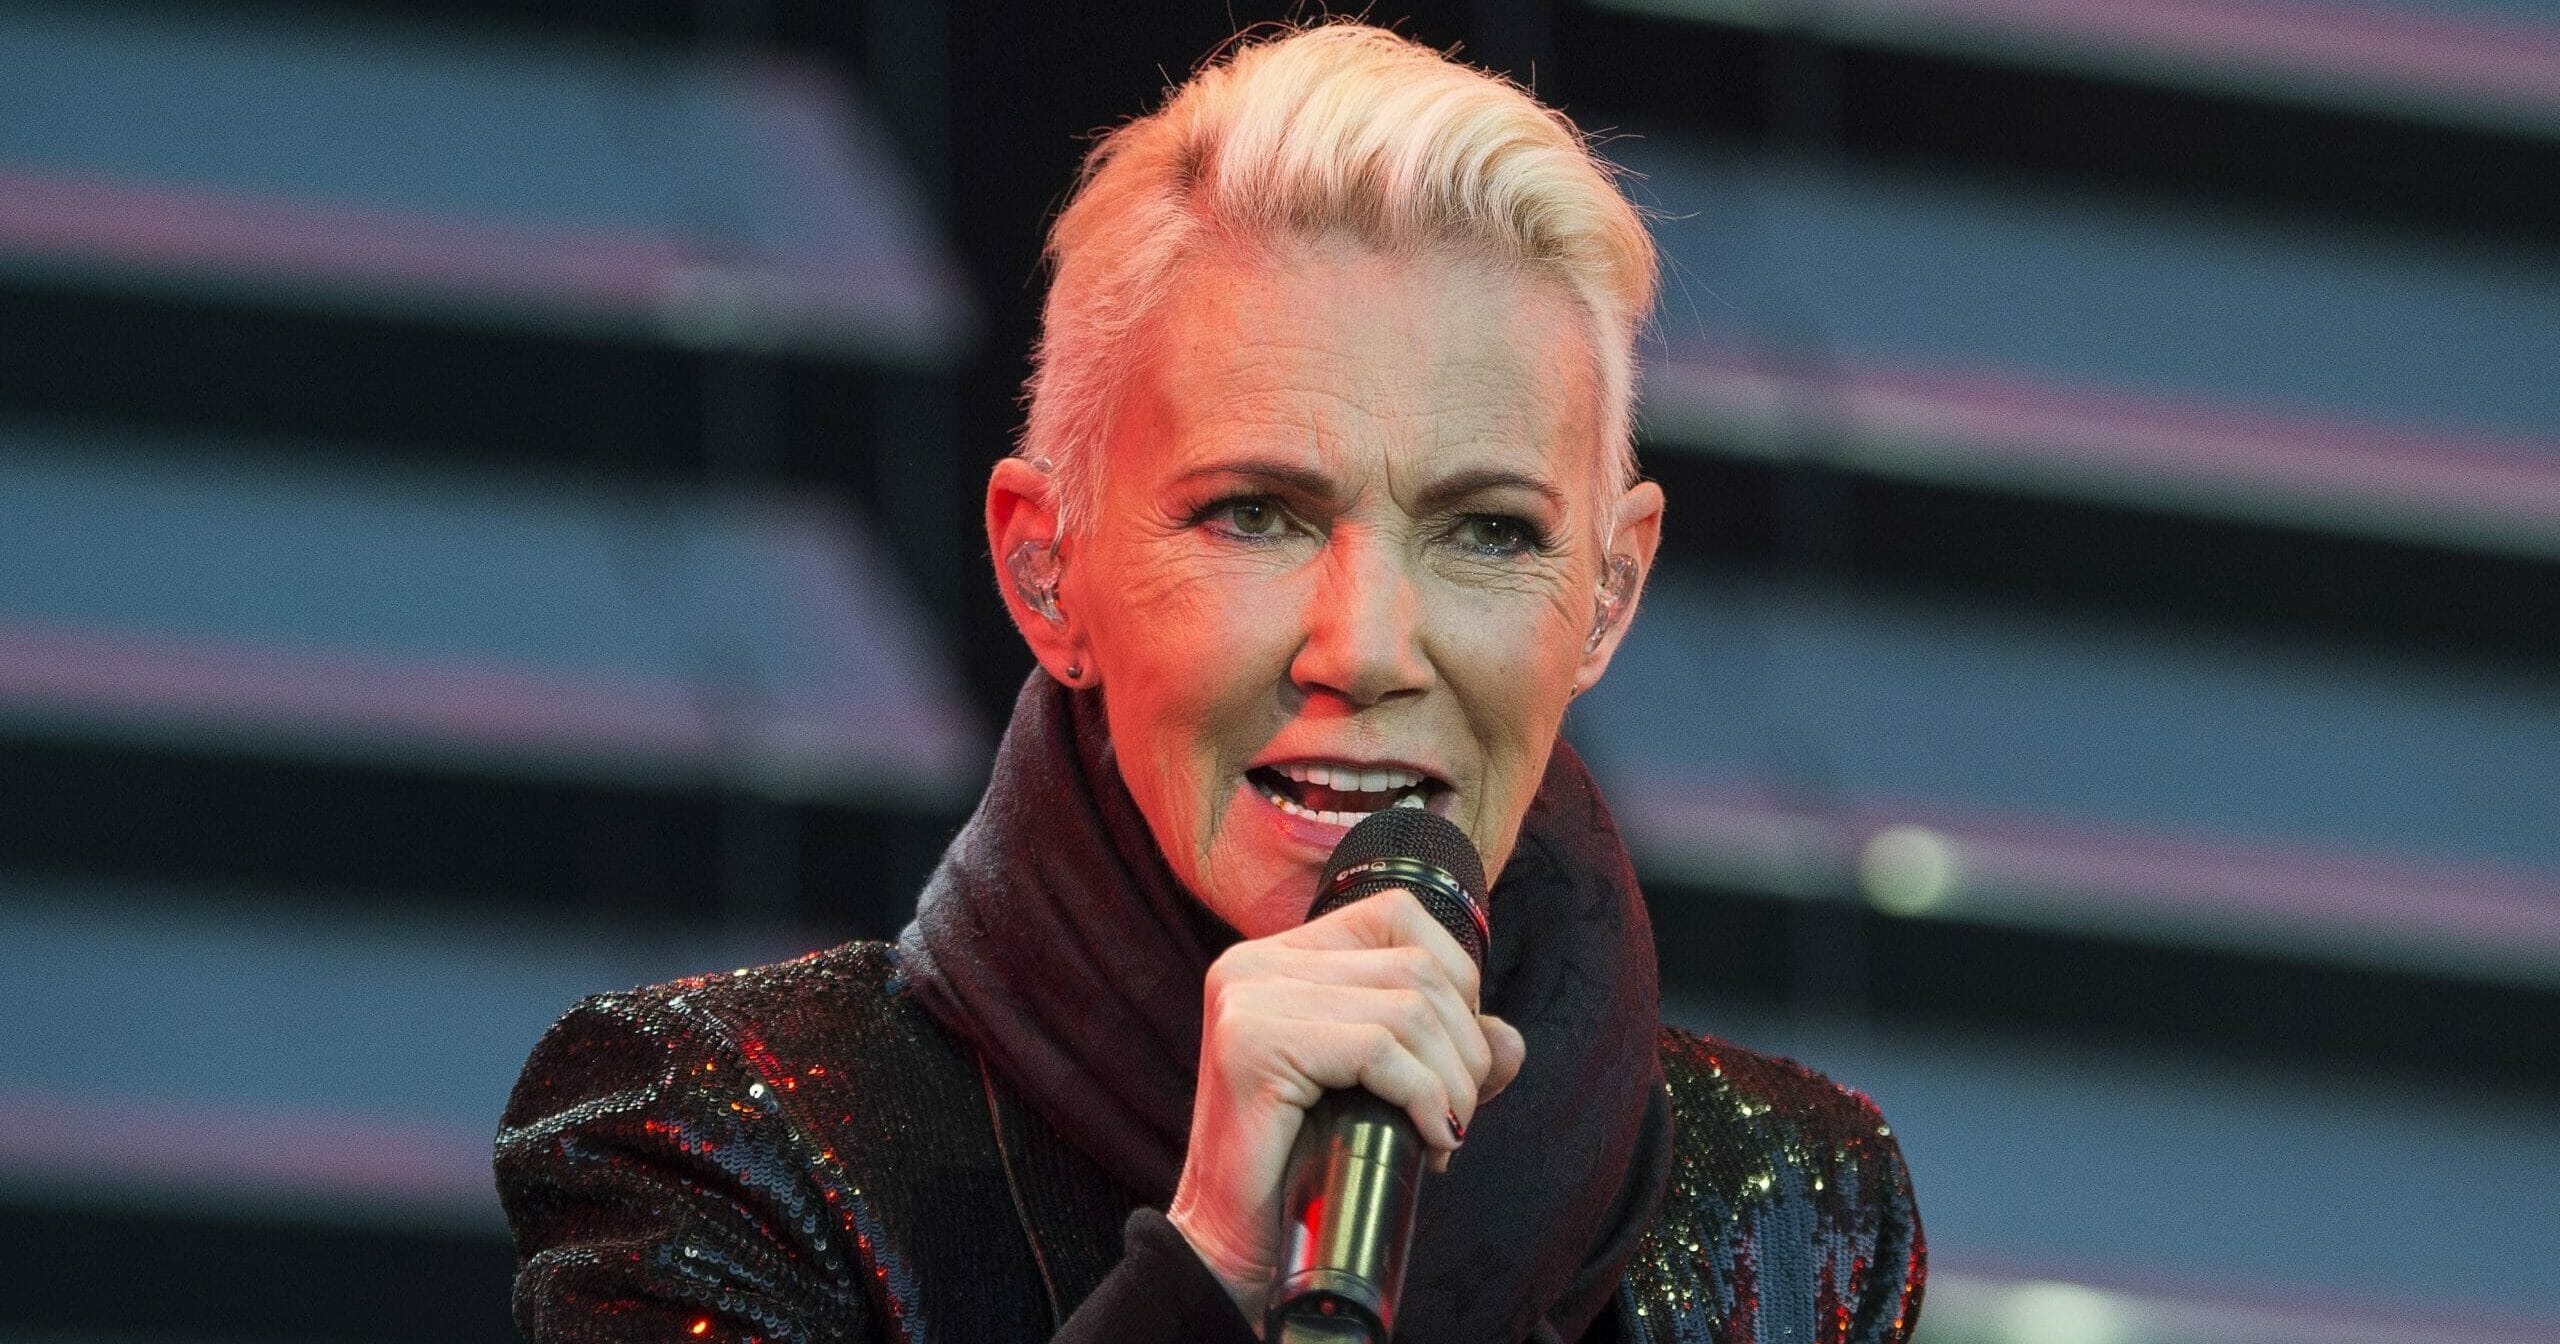 In this file photo dated July 18, 2015, Marie Fredriksson, singer of the pop duo Roxette.